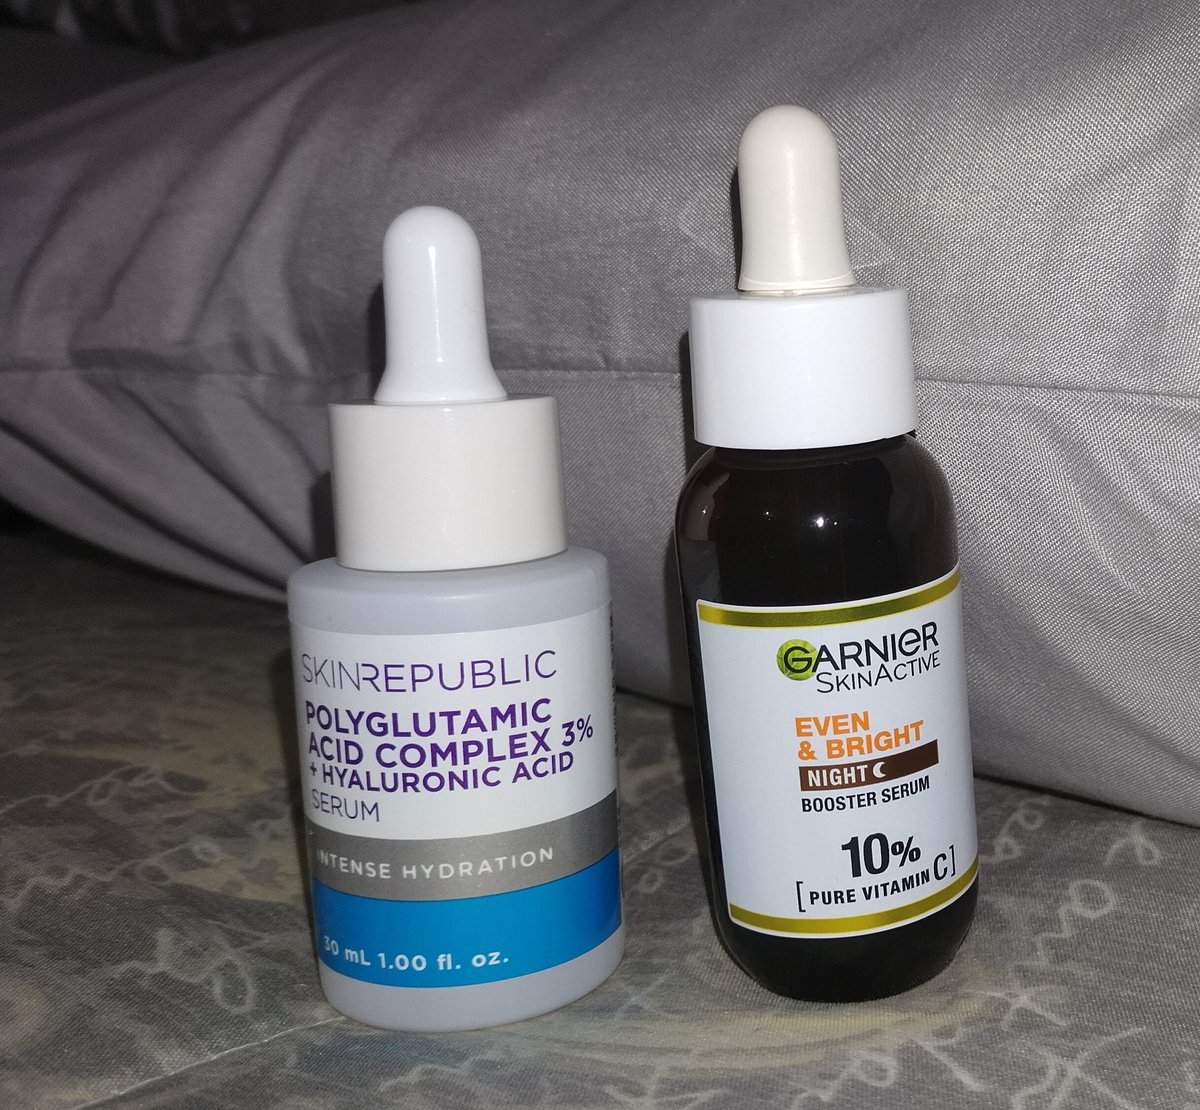 My Top 2 serums right now. I am obsessed! Polyglutamic x Hyaluronic from the morning till afternoon for 95% skin hydration. Vitamin C in the evening for glowing and smooth poreless skin